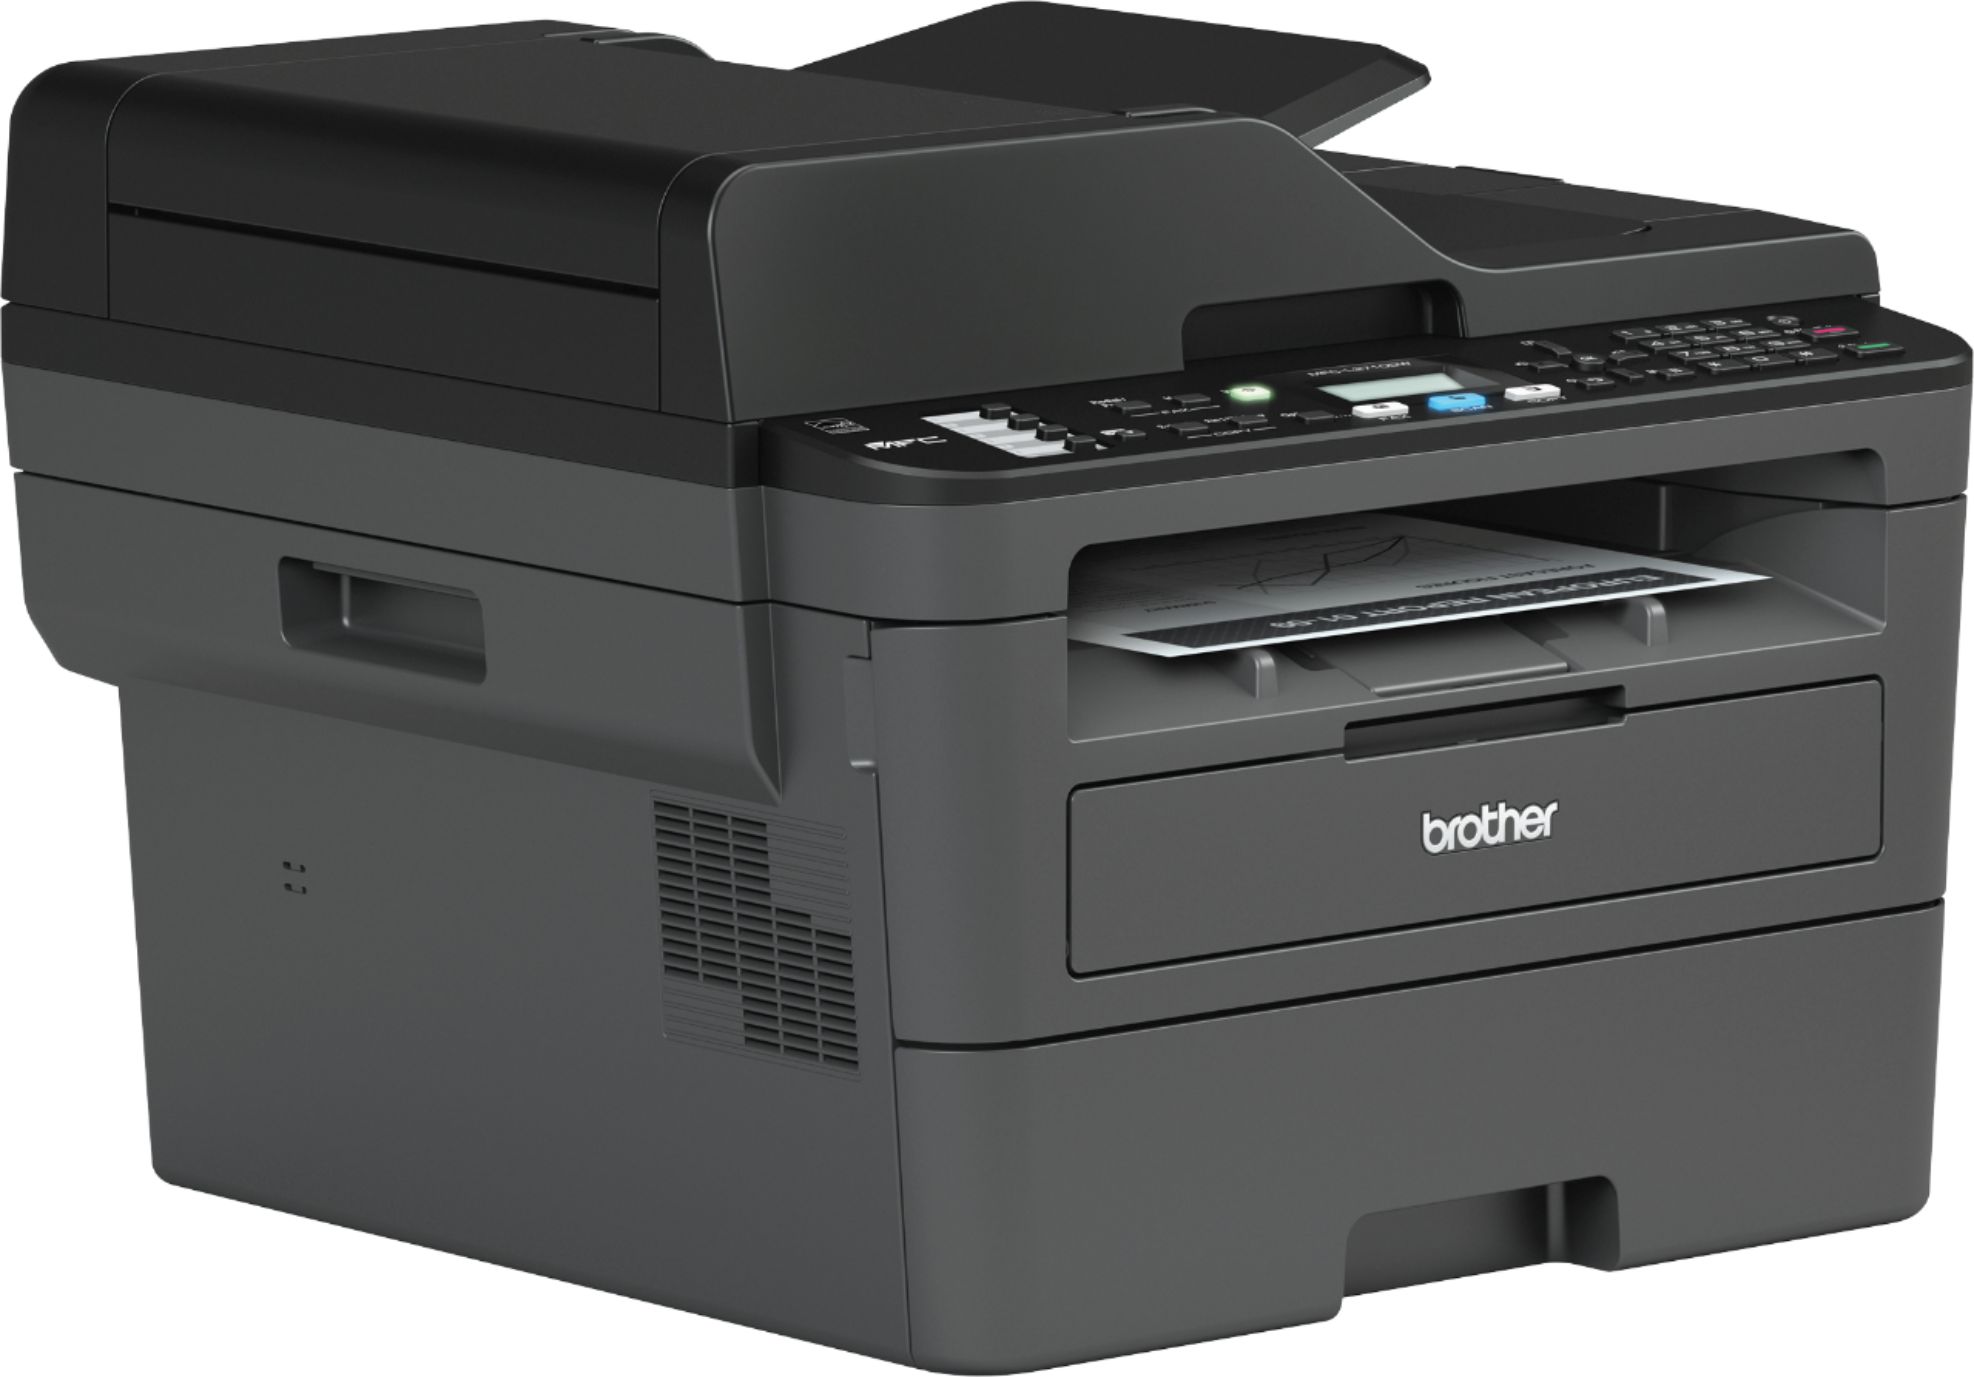 Angle View: Brother - MFC-L2710DW Wireless Black-and-White All-in-One Refresh Subscription Eligible Laser Printer - Black